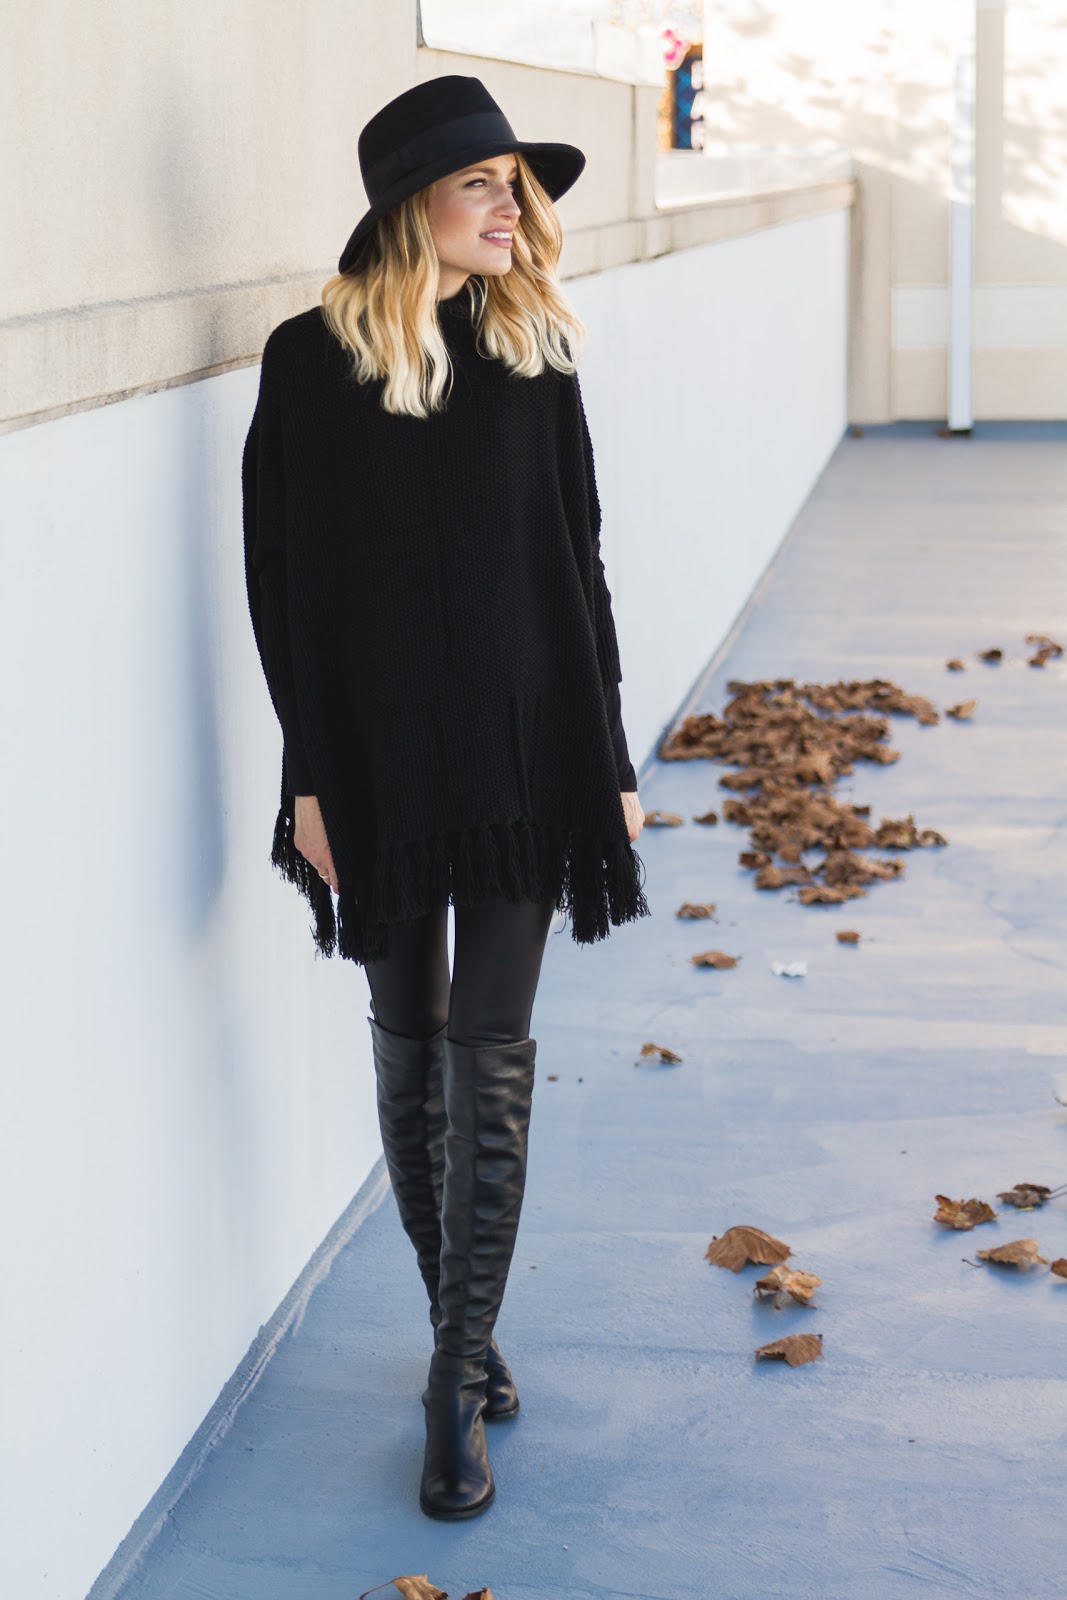 Dressed In All Black | Little Blonde Book A Fashion Blog by Taylor Morgan